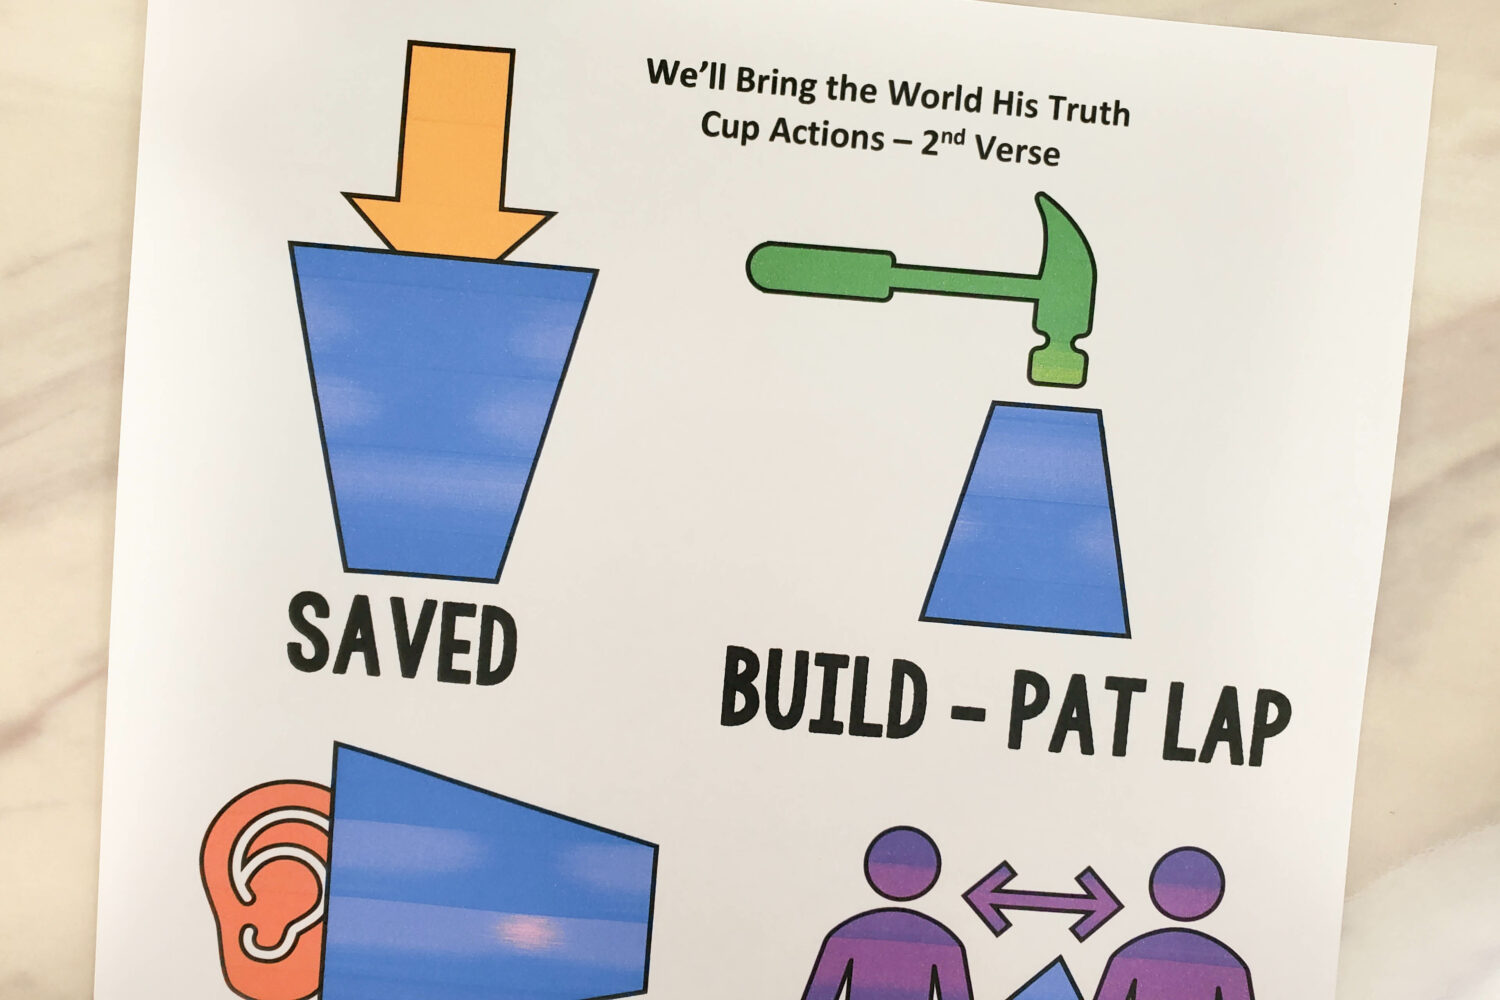 We'll Bring the World His Truth Cup Actions fun singing time lesson plan! Use a cup combined with simple actions that represent the words from each line of the song as you interact and sing for an immersive learning activity! Printable song helps for LDS Primary music leaders.